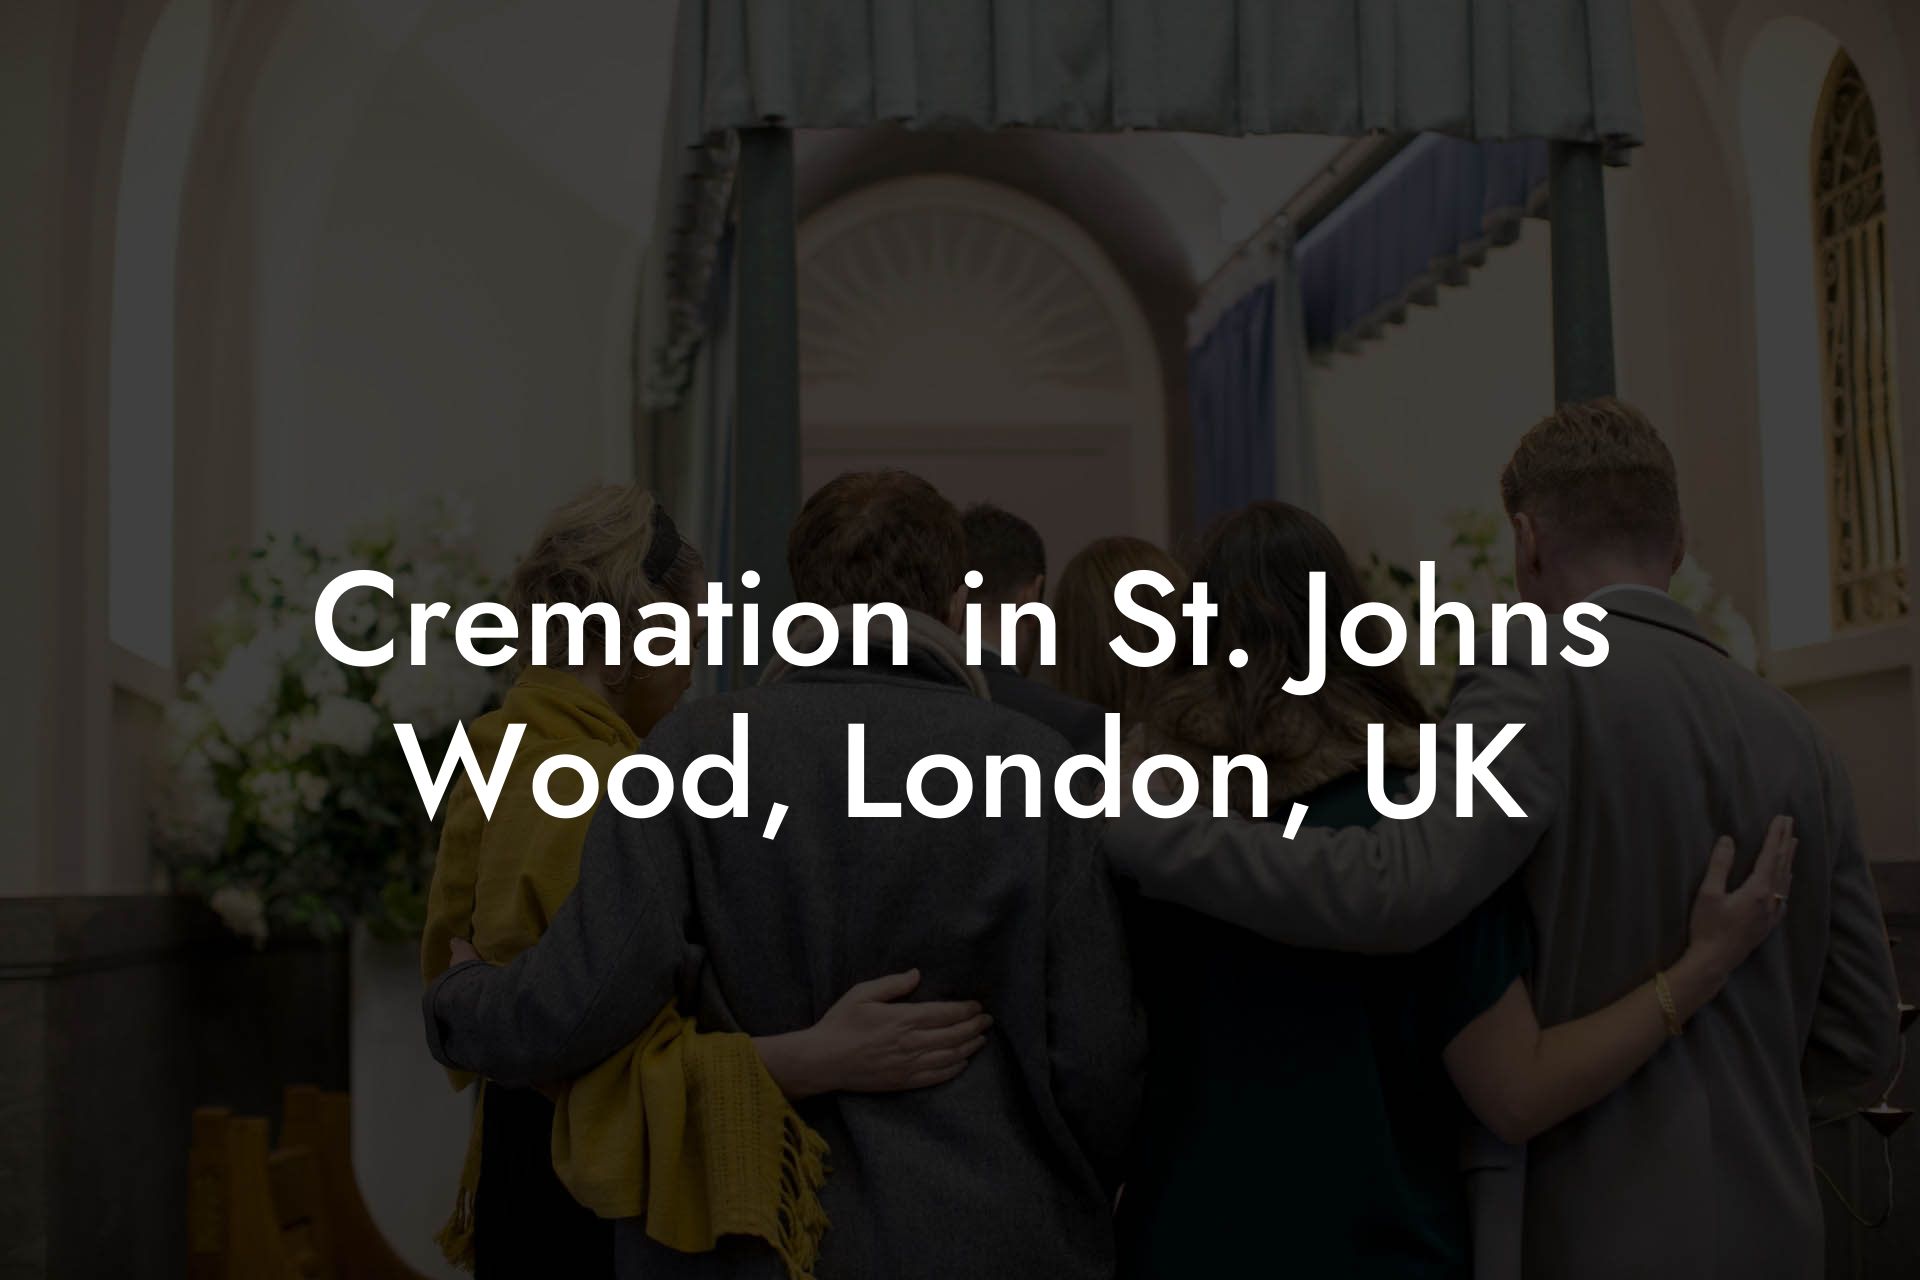 Cremation in St. Johns Wood, London, UK